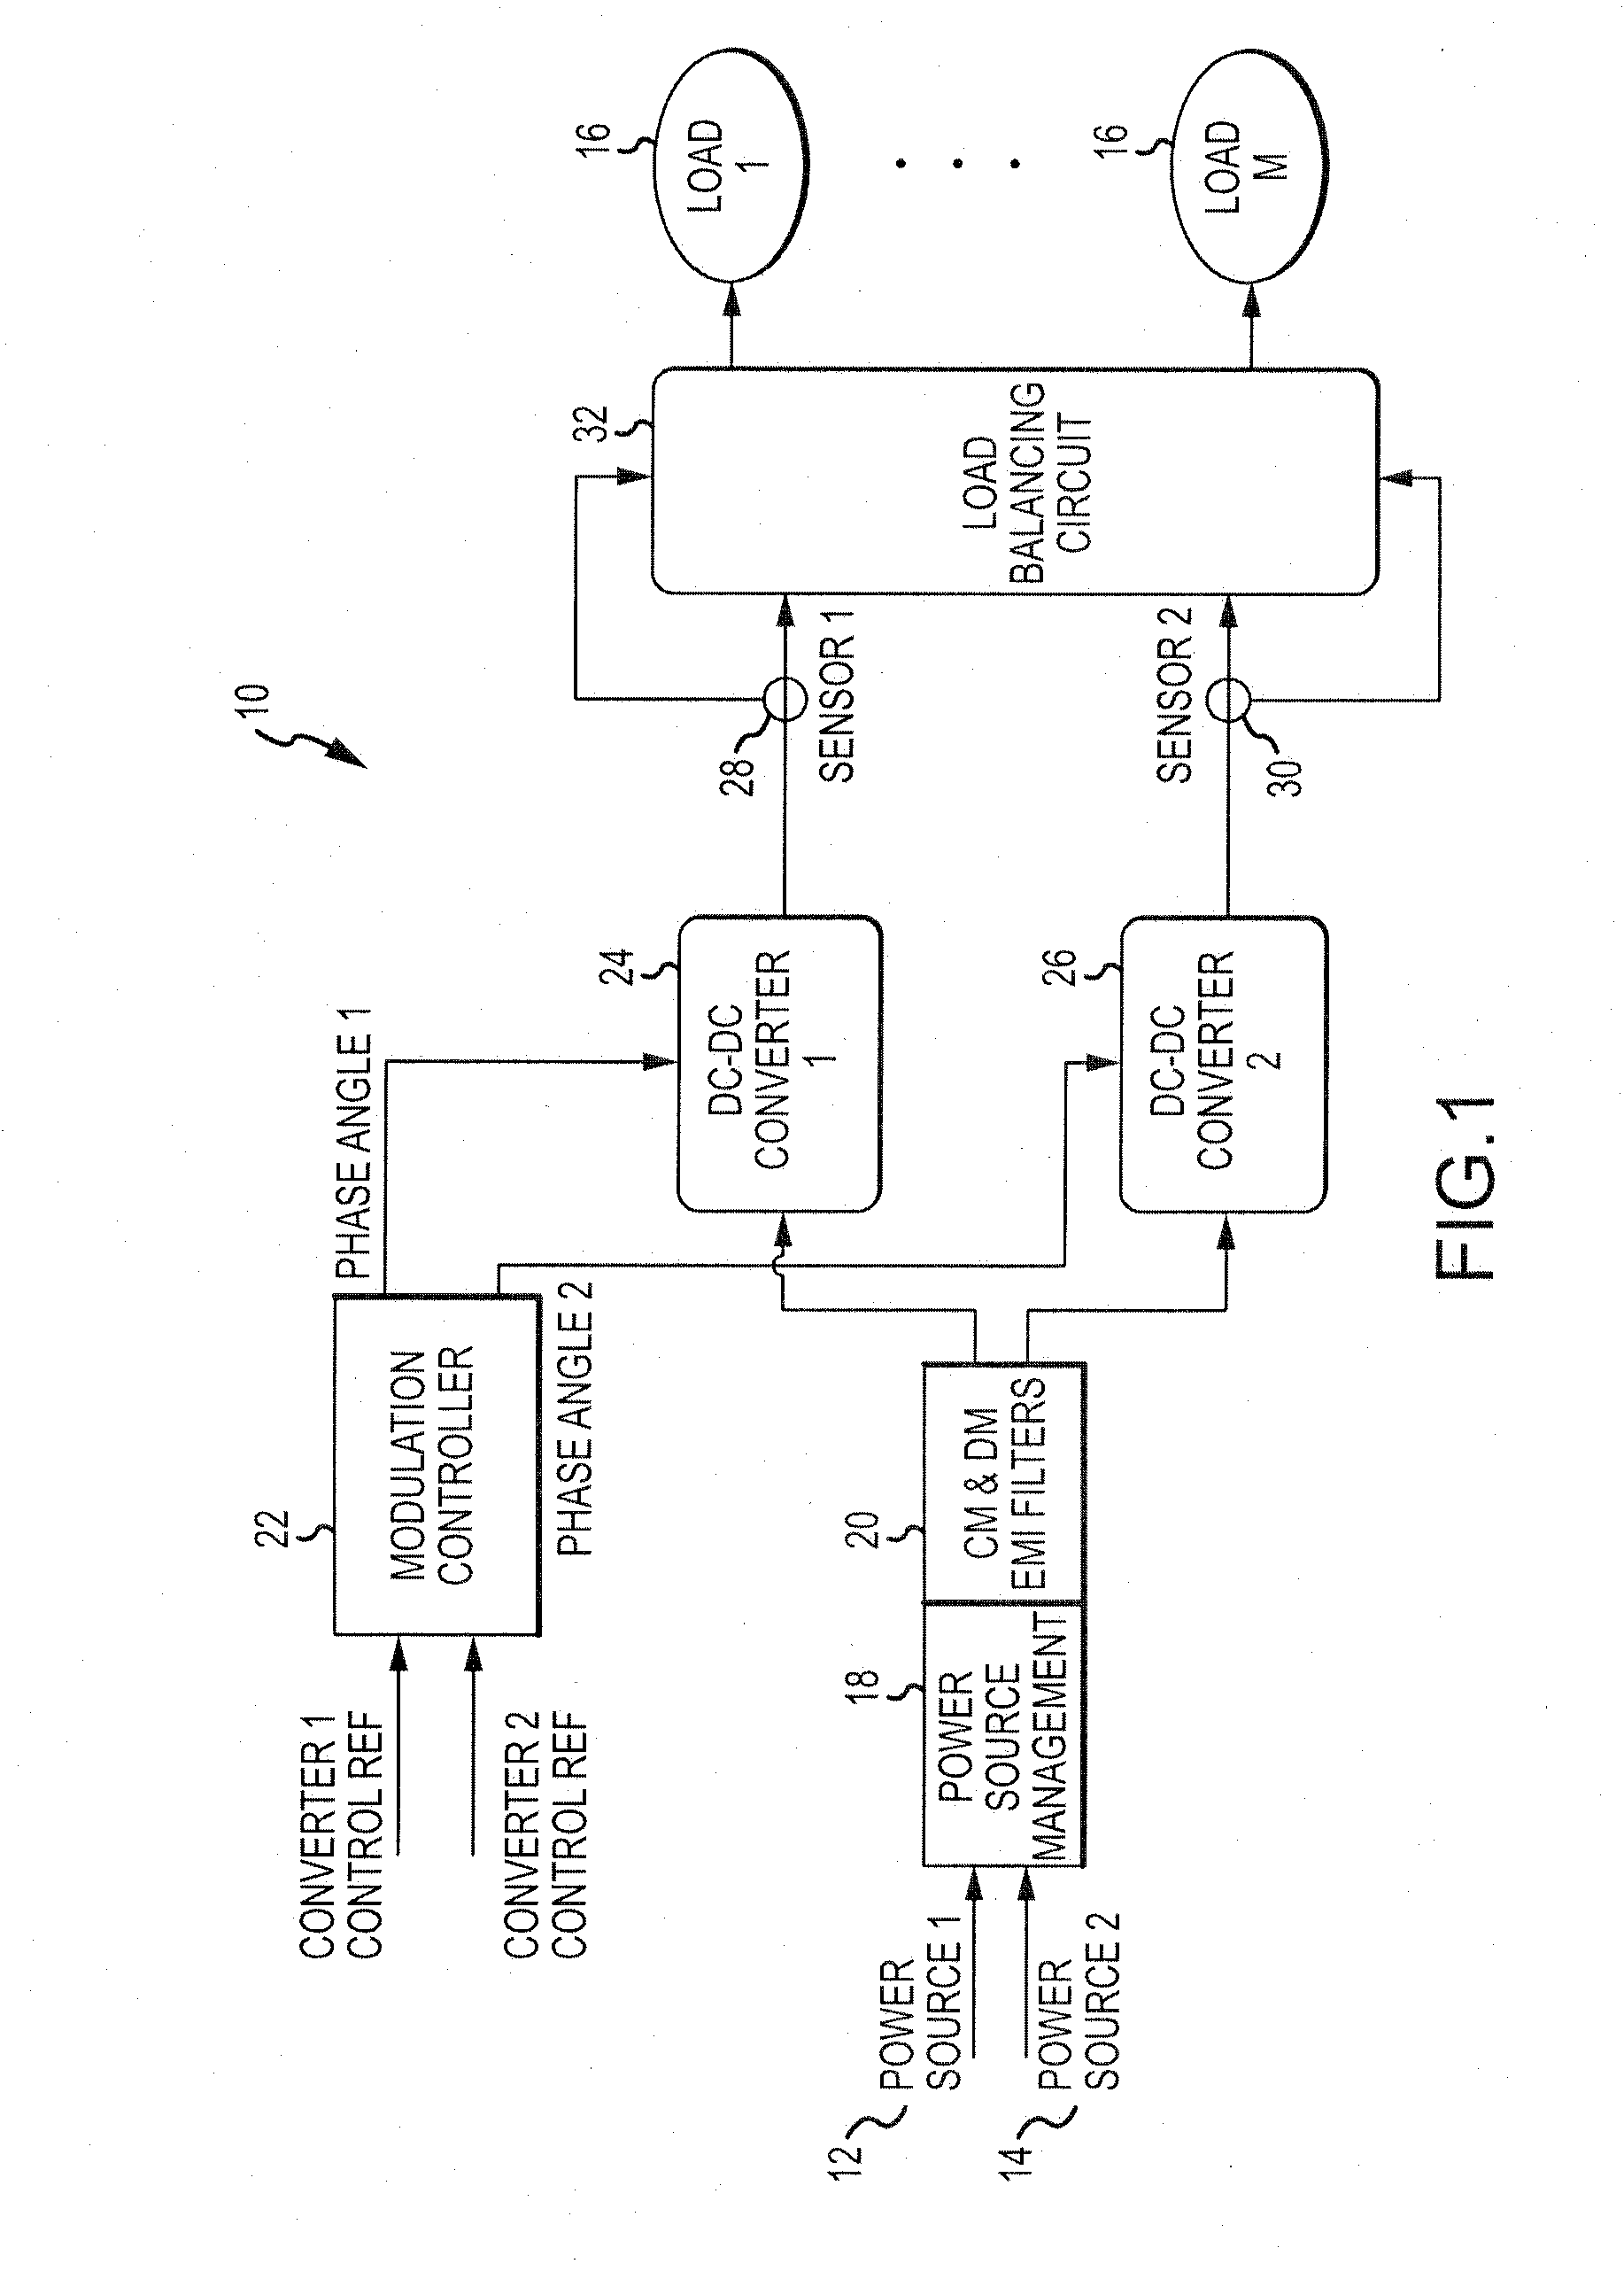 Load balanced split-phase modulation and harmonic control of dc-dc converter pair/column for reduced EMI and smaller EMI filters